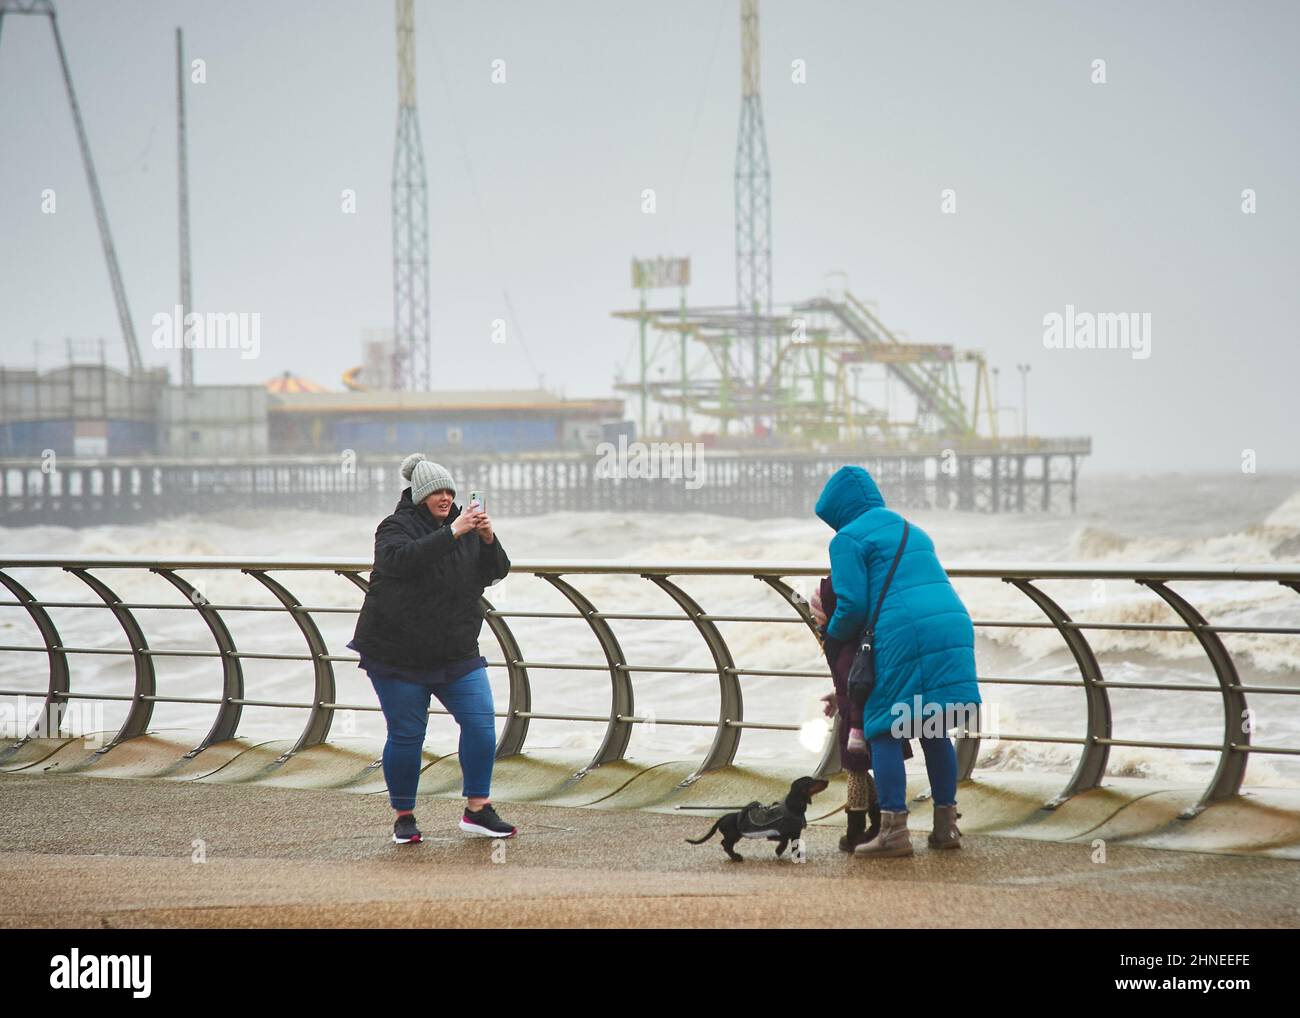 Storm Dudley,one of two storms hitting the UK arrives at Blackpool on the North West coast of England closely followed by storm Eunice 24 hours later,both bringing heavy rain and very strong winds. Taking pictures in front of rough sea Stock Photo